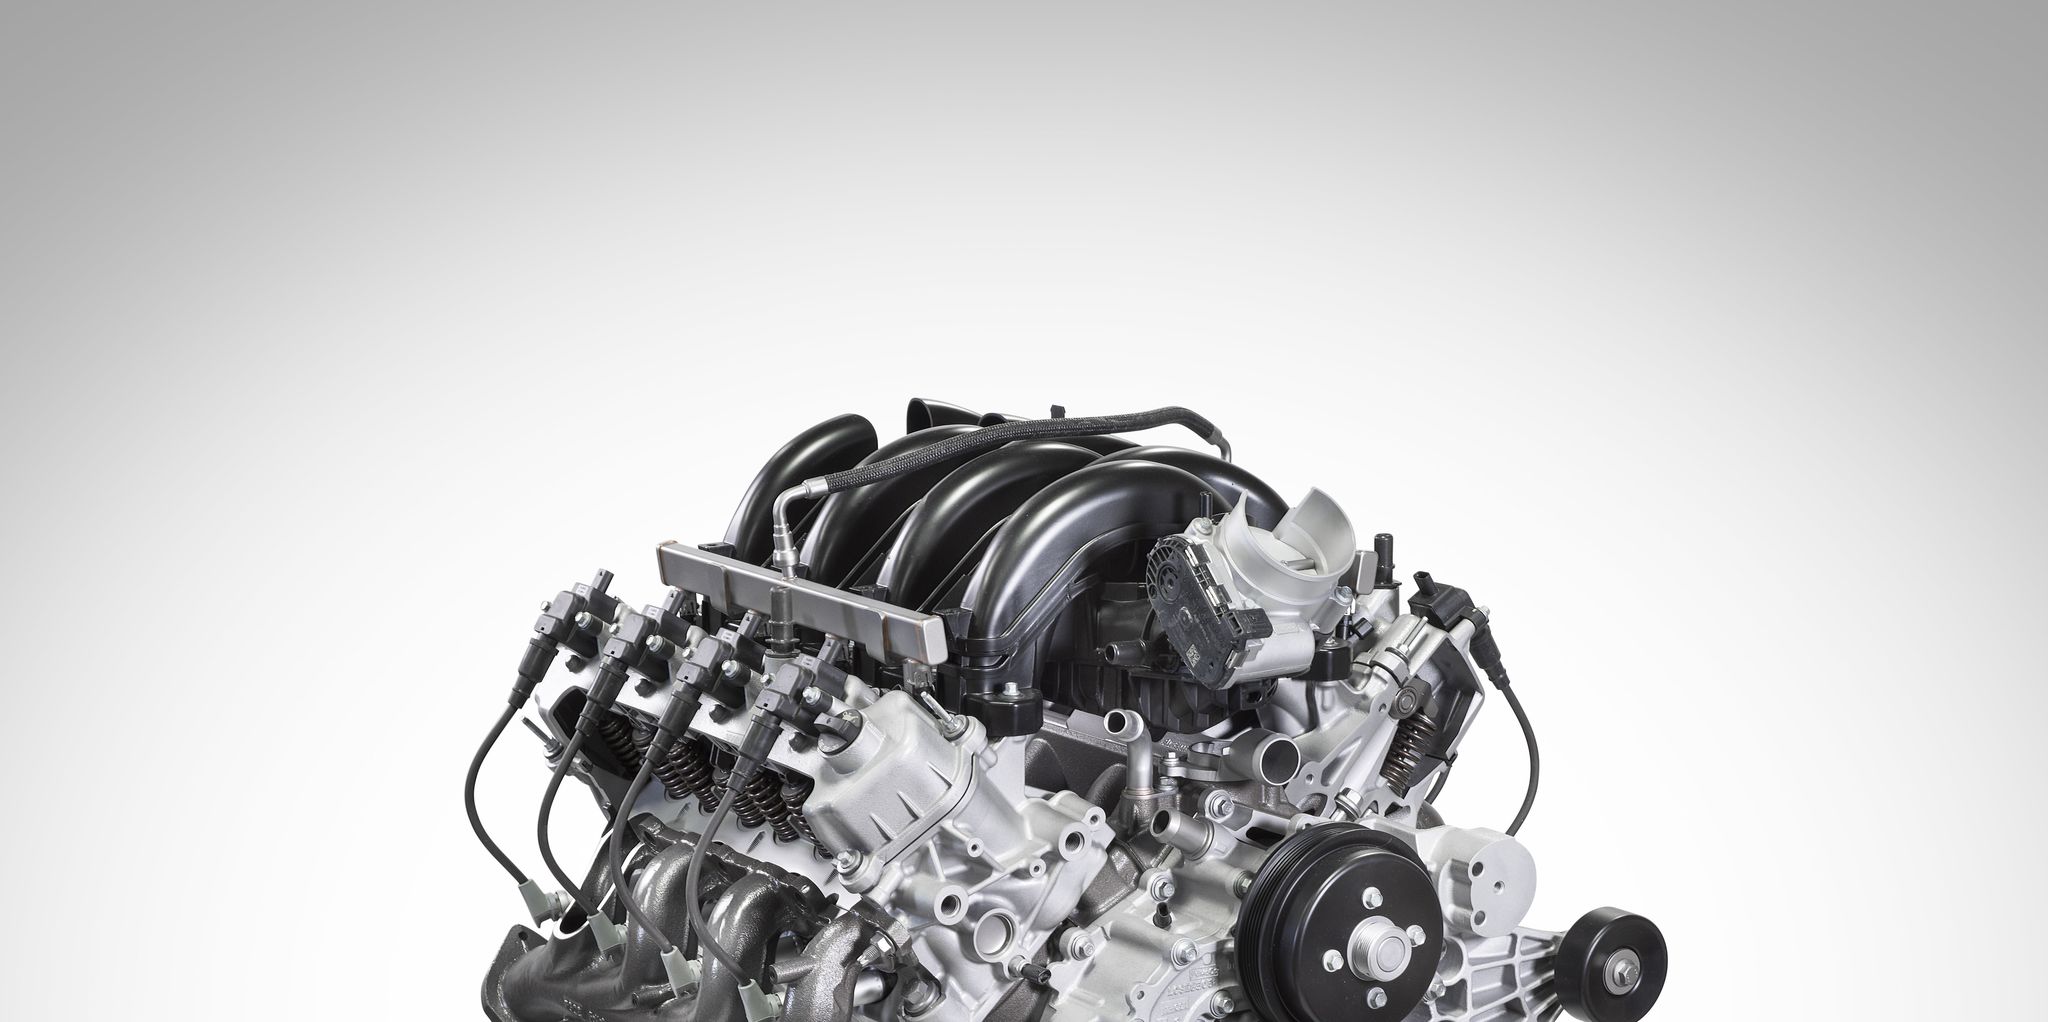 ford’s all new 73 liter v8 gasoline engine that debuted last month in f series super duty pickups is also available in super duty chassis cab, f 650 and f 750 medium duty trucks, e series, and f 53 and f 59 stripped chassis this 73 liter v8 generates more torque and power than the 68 liter v10 engine it replaces